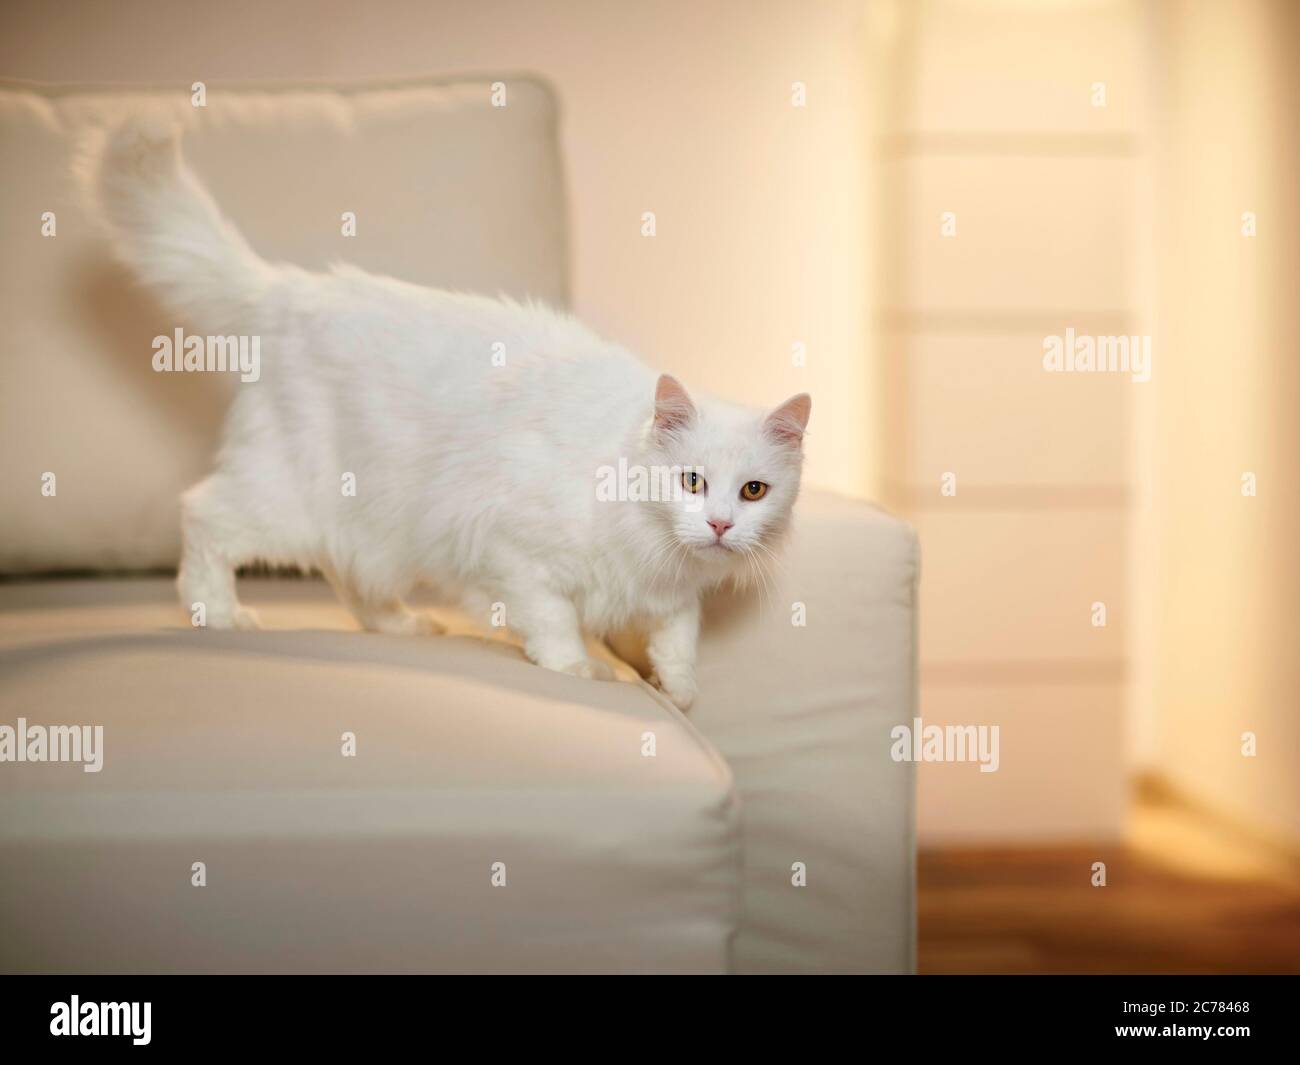 Turkish Angora. White adult cat walking on a couch. Germany Stock Photo